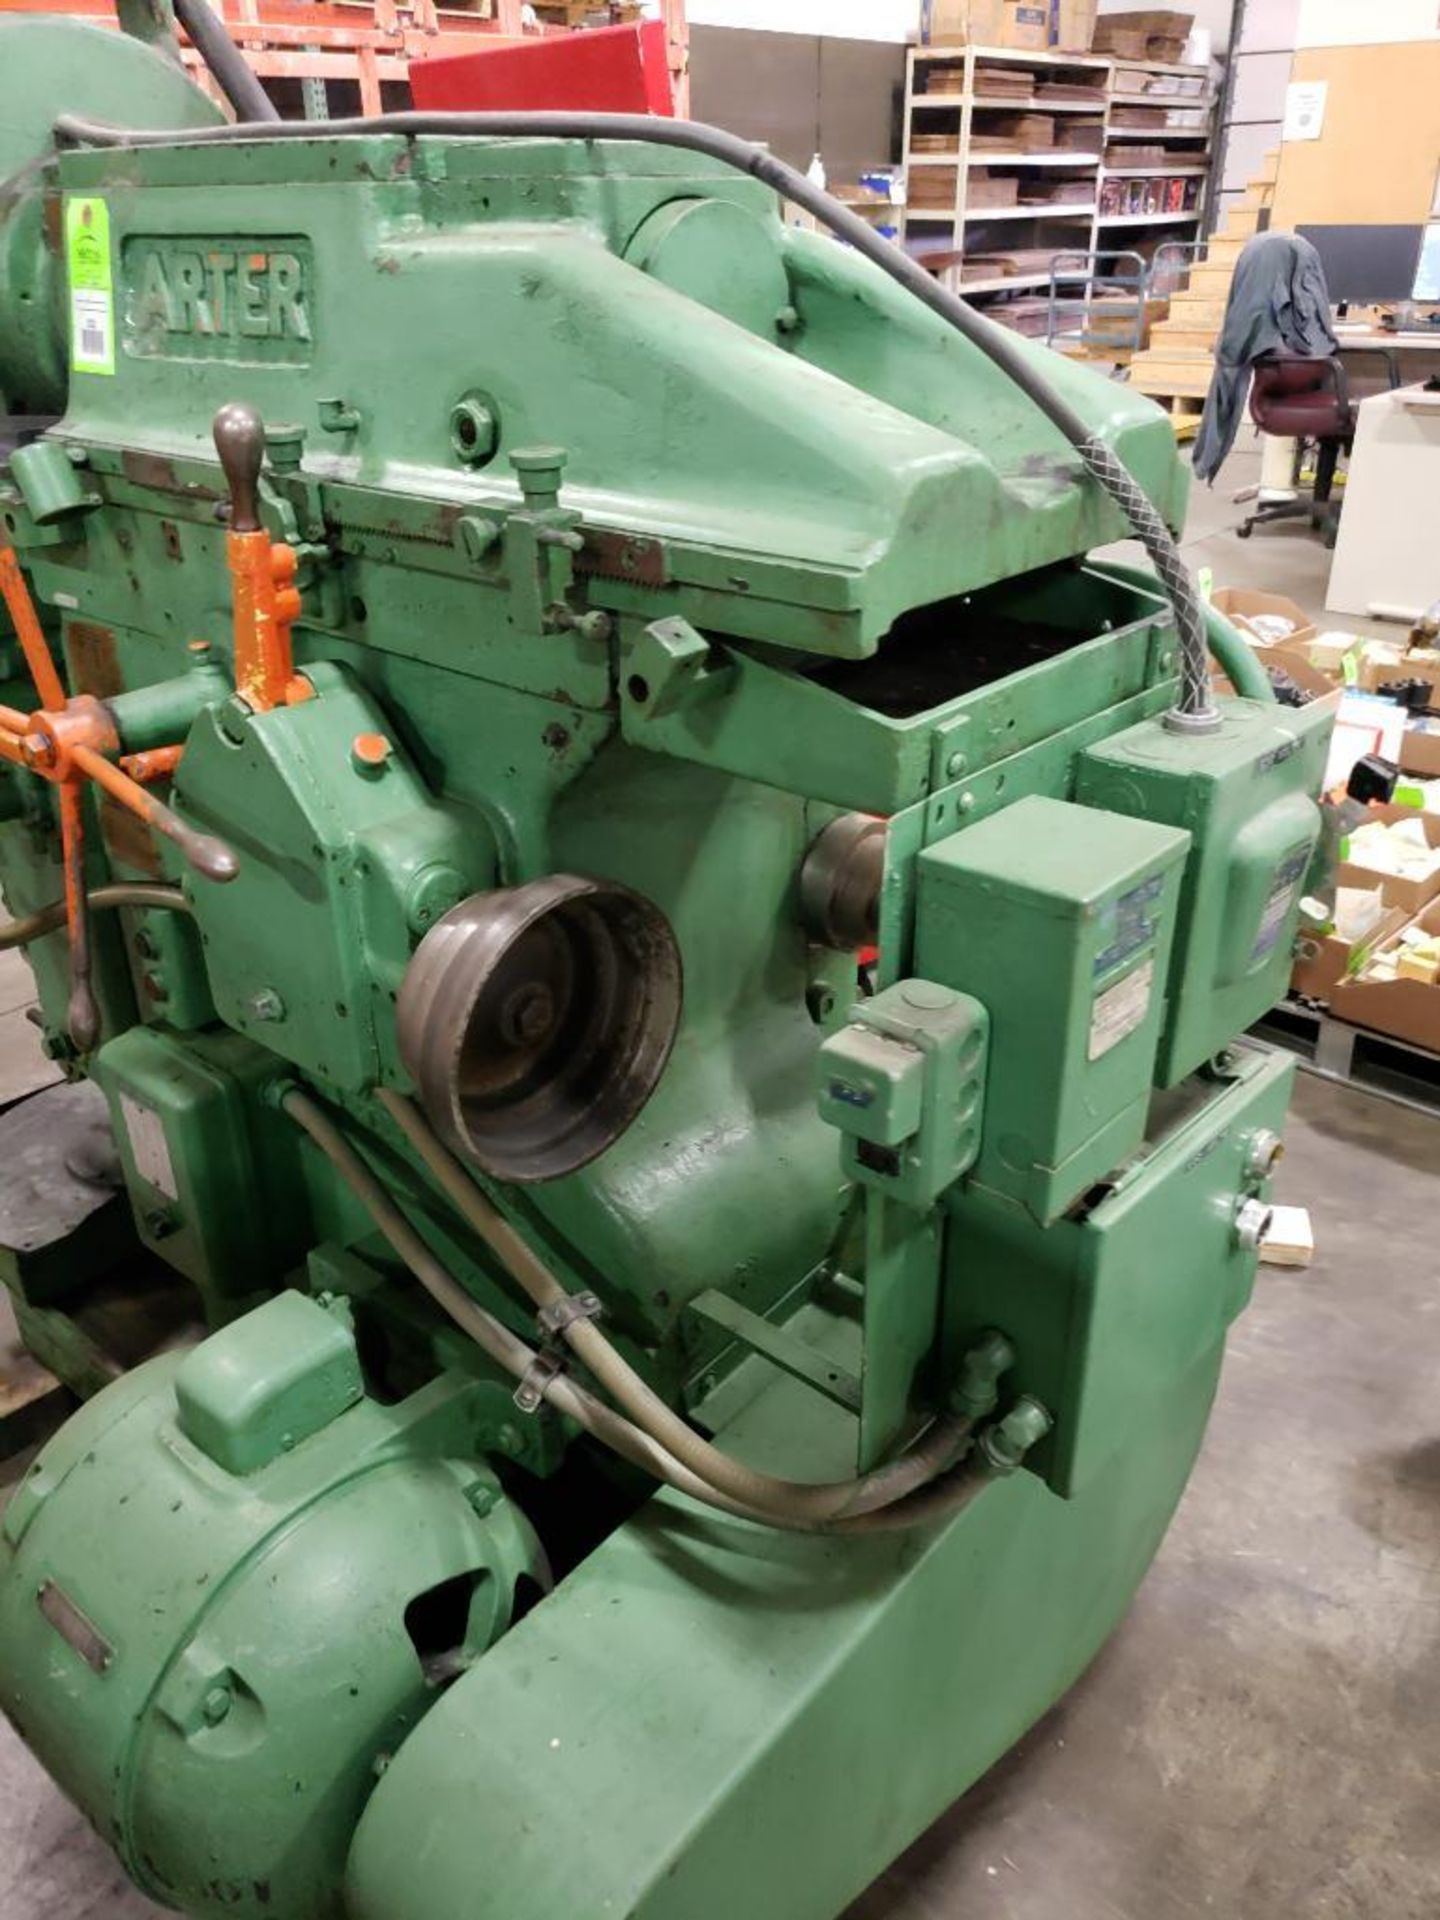 Arter Winding Machine Company A-1-8 horizontal spindle rotary surface grinder, 230V Magnetic Chuck. - Image 17 of 23